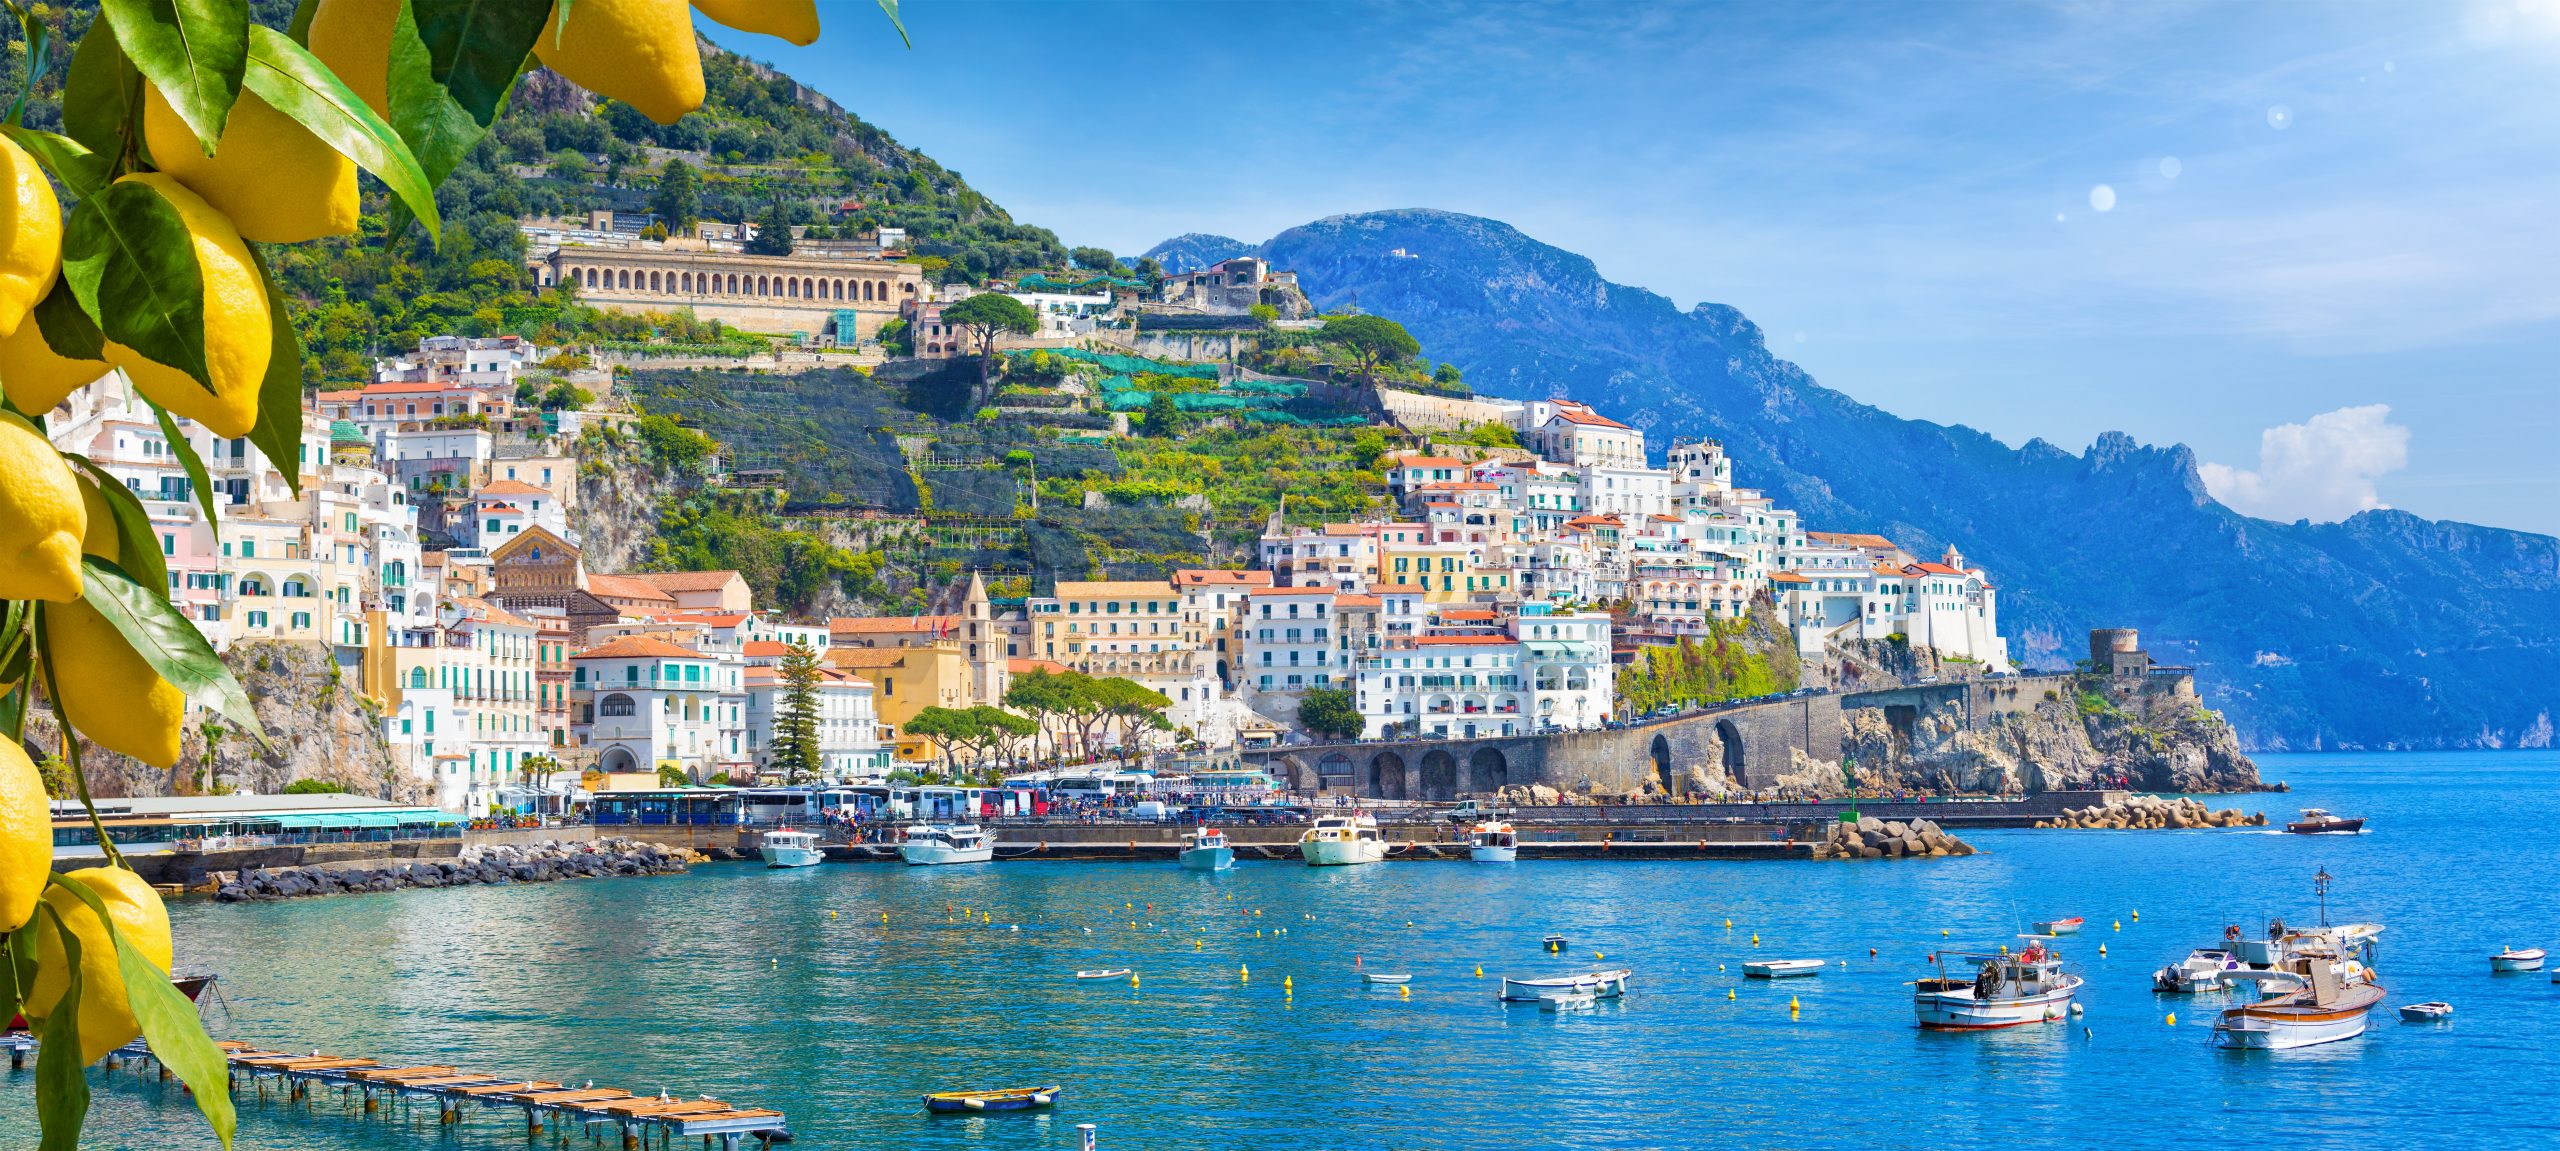 shore excursions from naples to amalfi coast